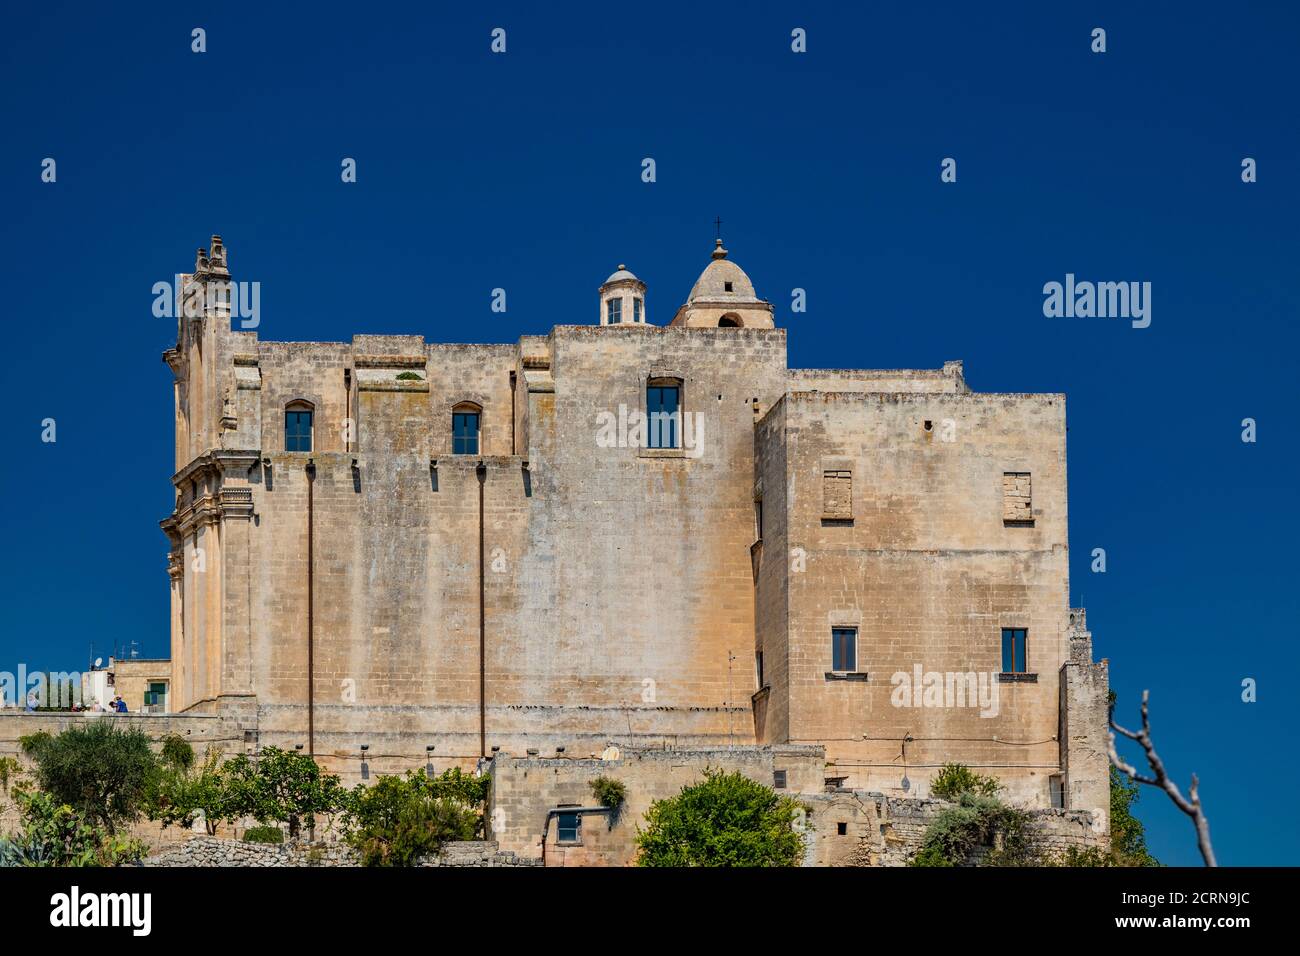 Matera, Basilicata, Italy - The church and convent of Sant'Agostino, in the Sasso Barisano, built on the ancient rupestrian crypt of San Giuliano. Stock Photo